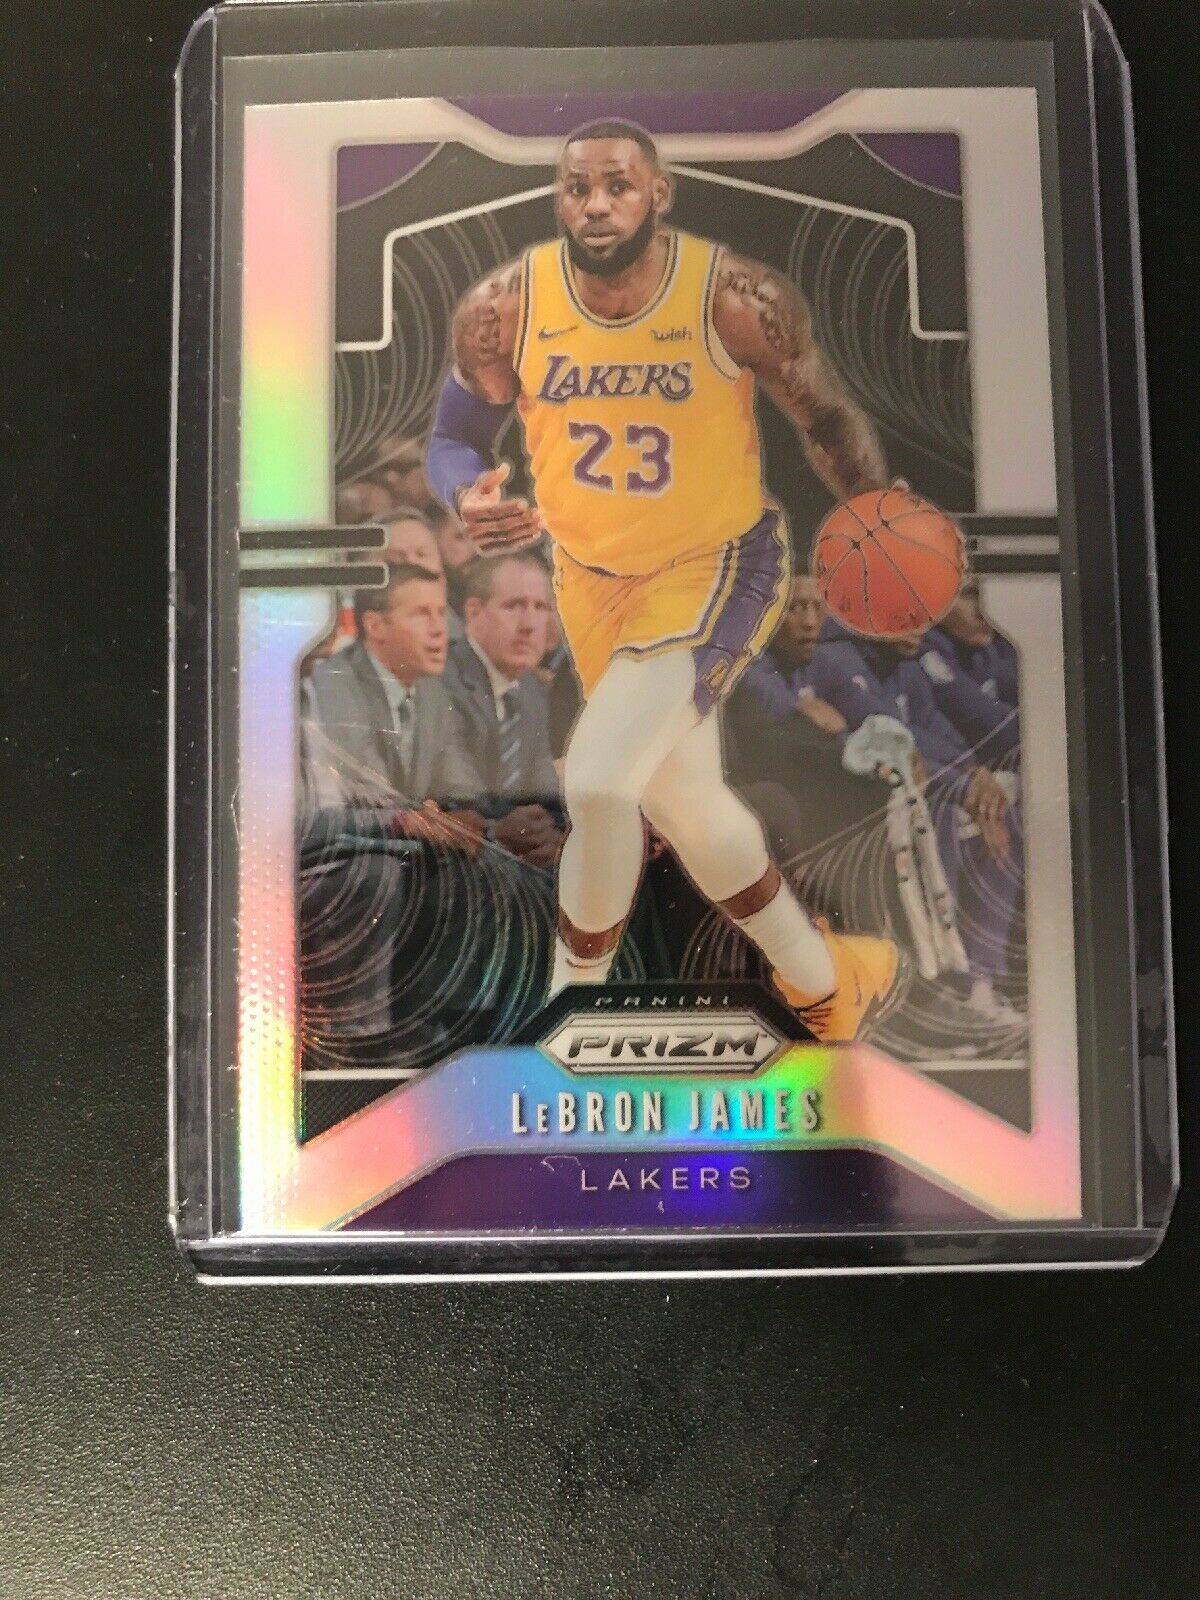 2019 Prizm Silver LeBron James, Los Angeles Lakers, sports card